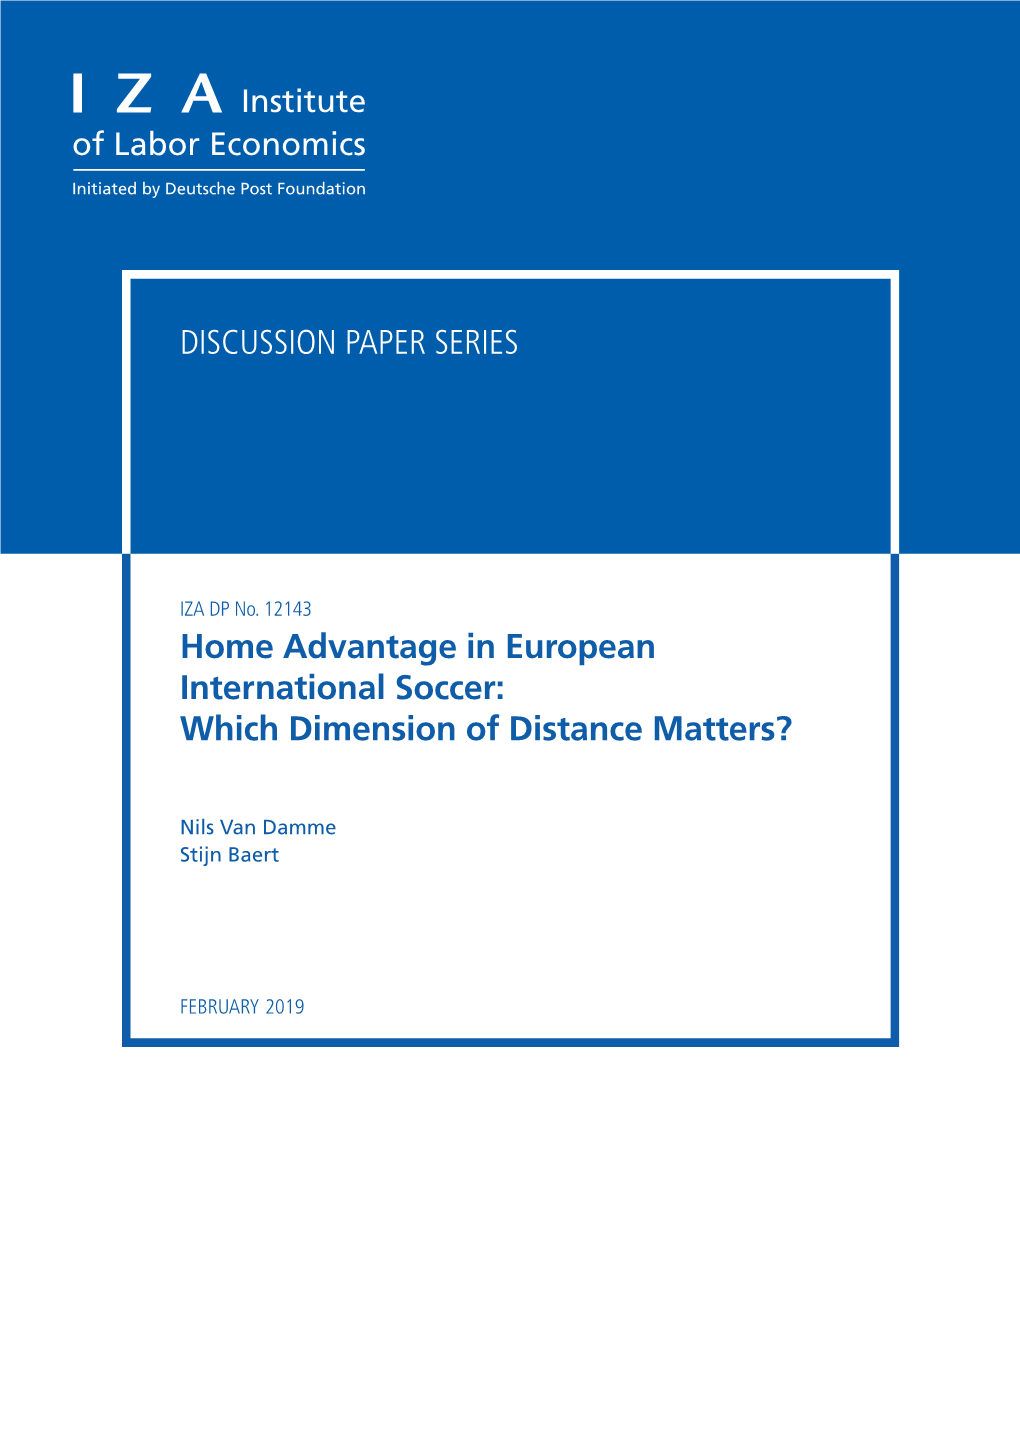 Home Advantage in European International Soccer: Which Dimension of Distance Matters?